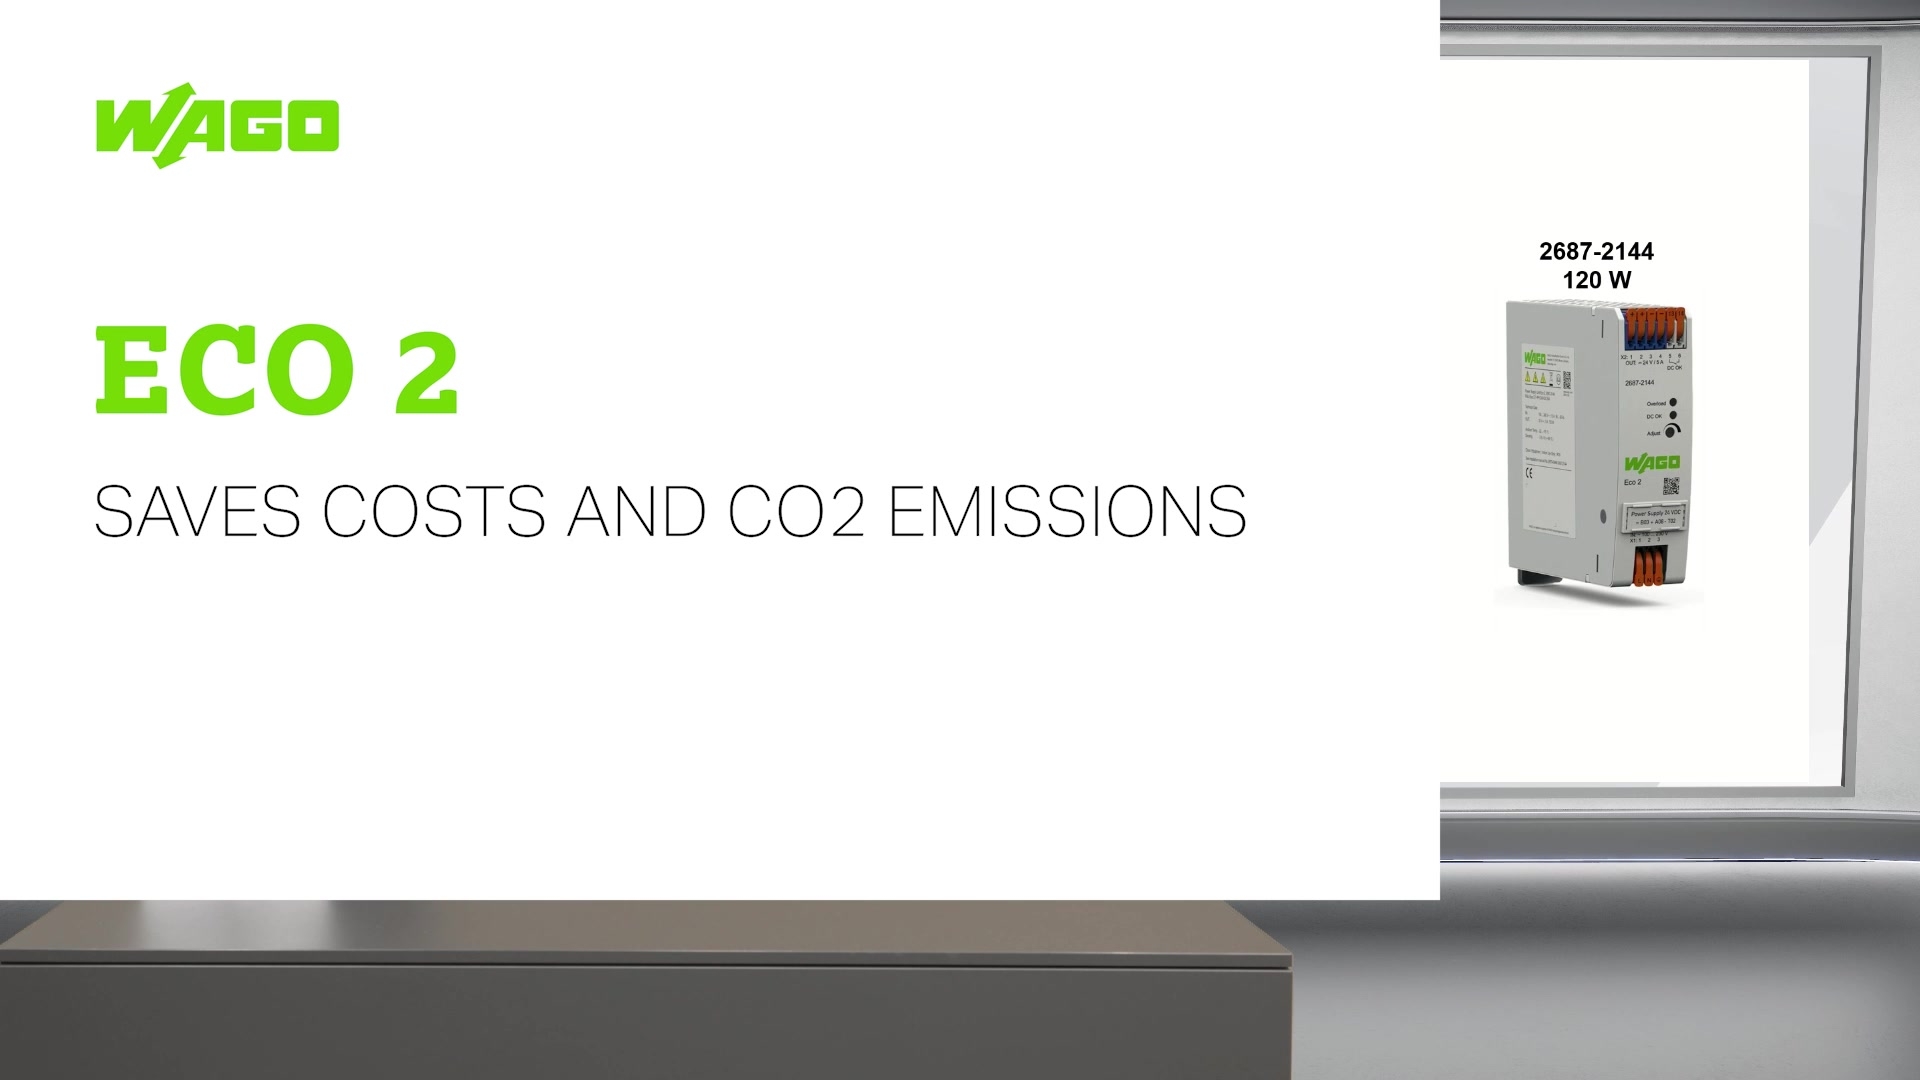 Eco 2 saves costs and CO2 emissions